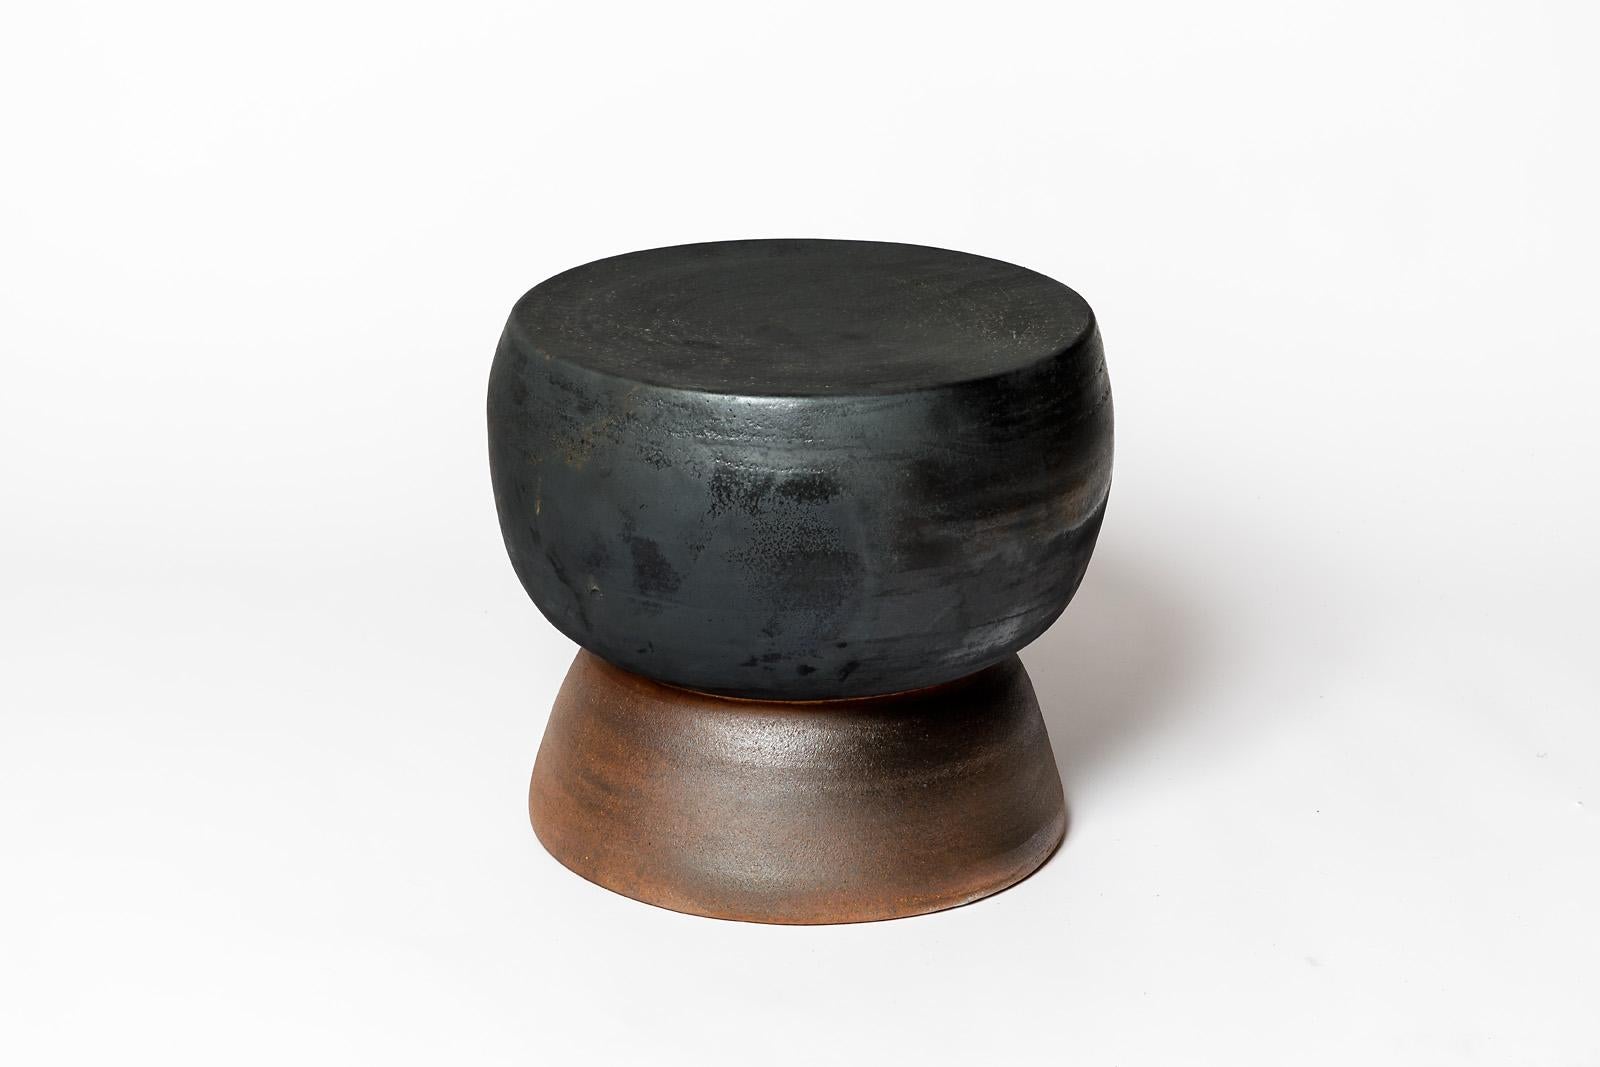 Beaux Arts Black glazed ceramic stool or coffee table by Mia Jensen, 2024. For Sale